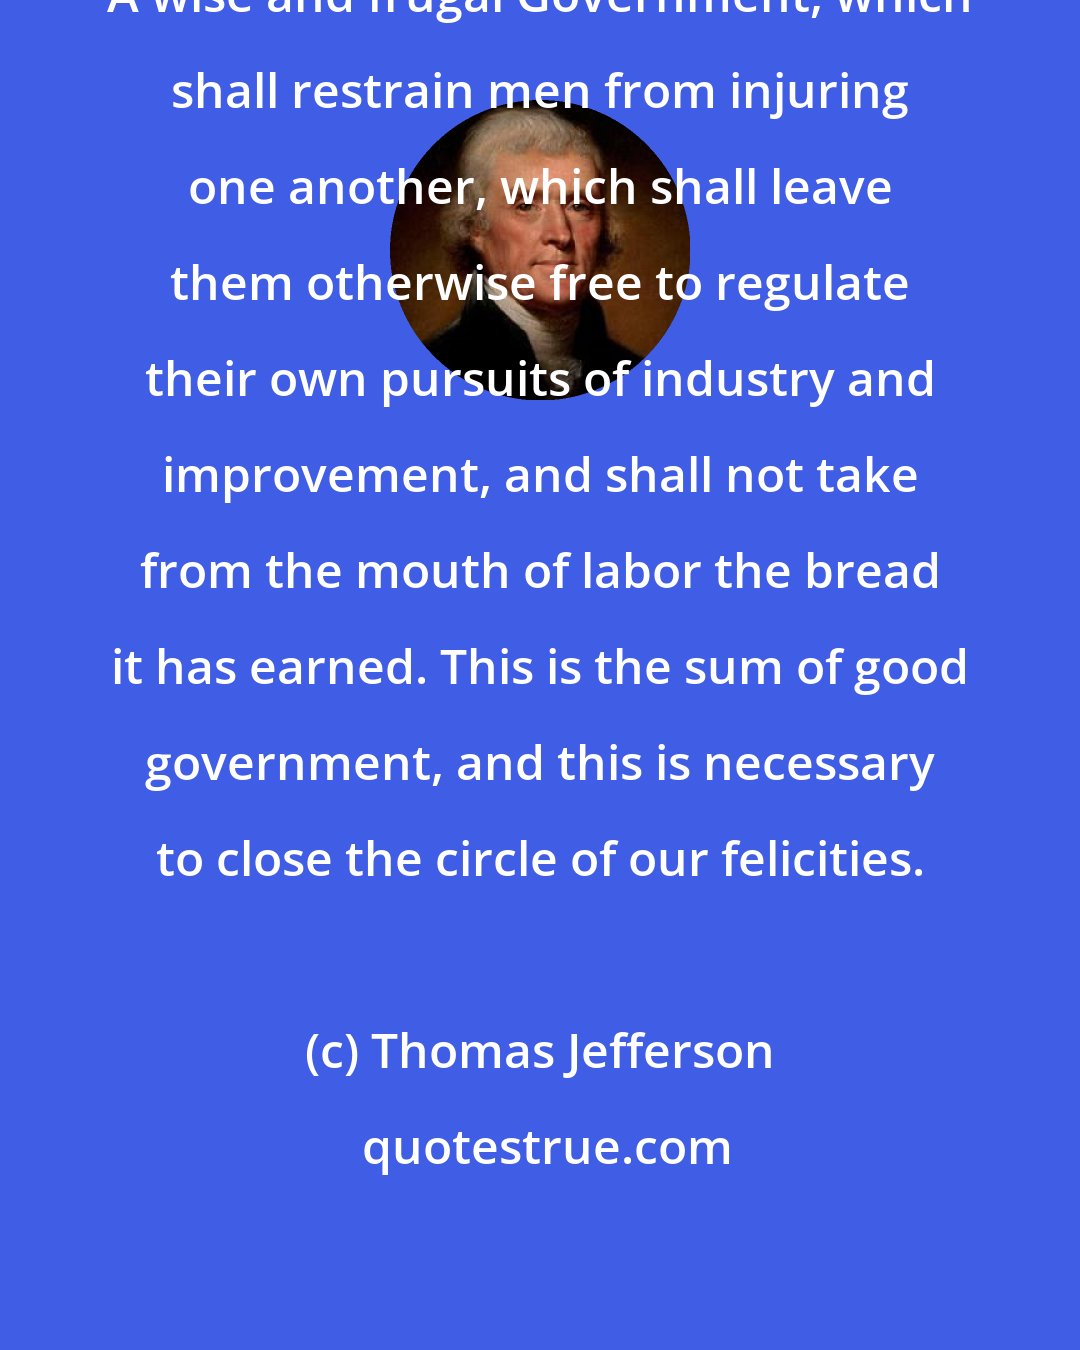 Thomas Jefferson: A wise and frugal Government, which shall restrain men from injuring one another, which shall leave them otherwise free to regulate their own pursuits of industry and improvement, and shall not take from the mouth of labor the bread it has earned. This is the sum of good government, and this is necessary to close the circle of our felicities.